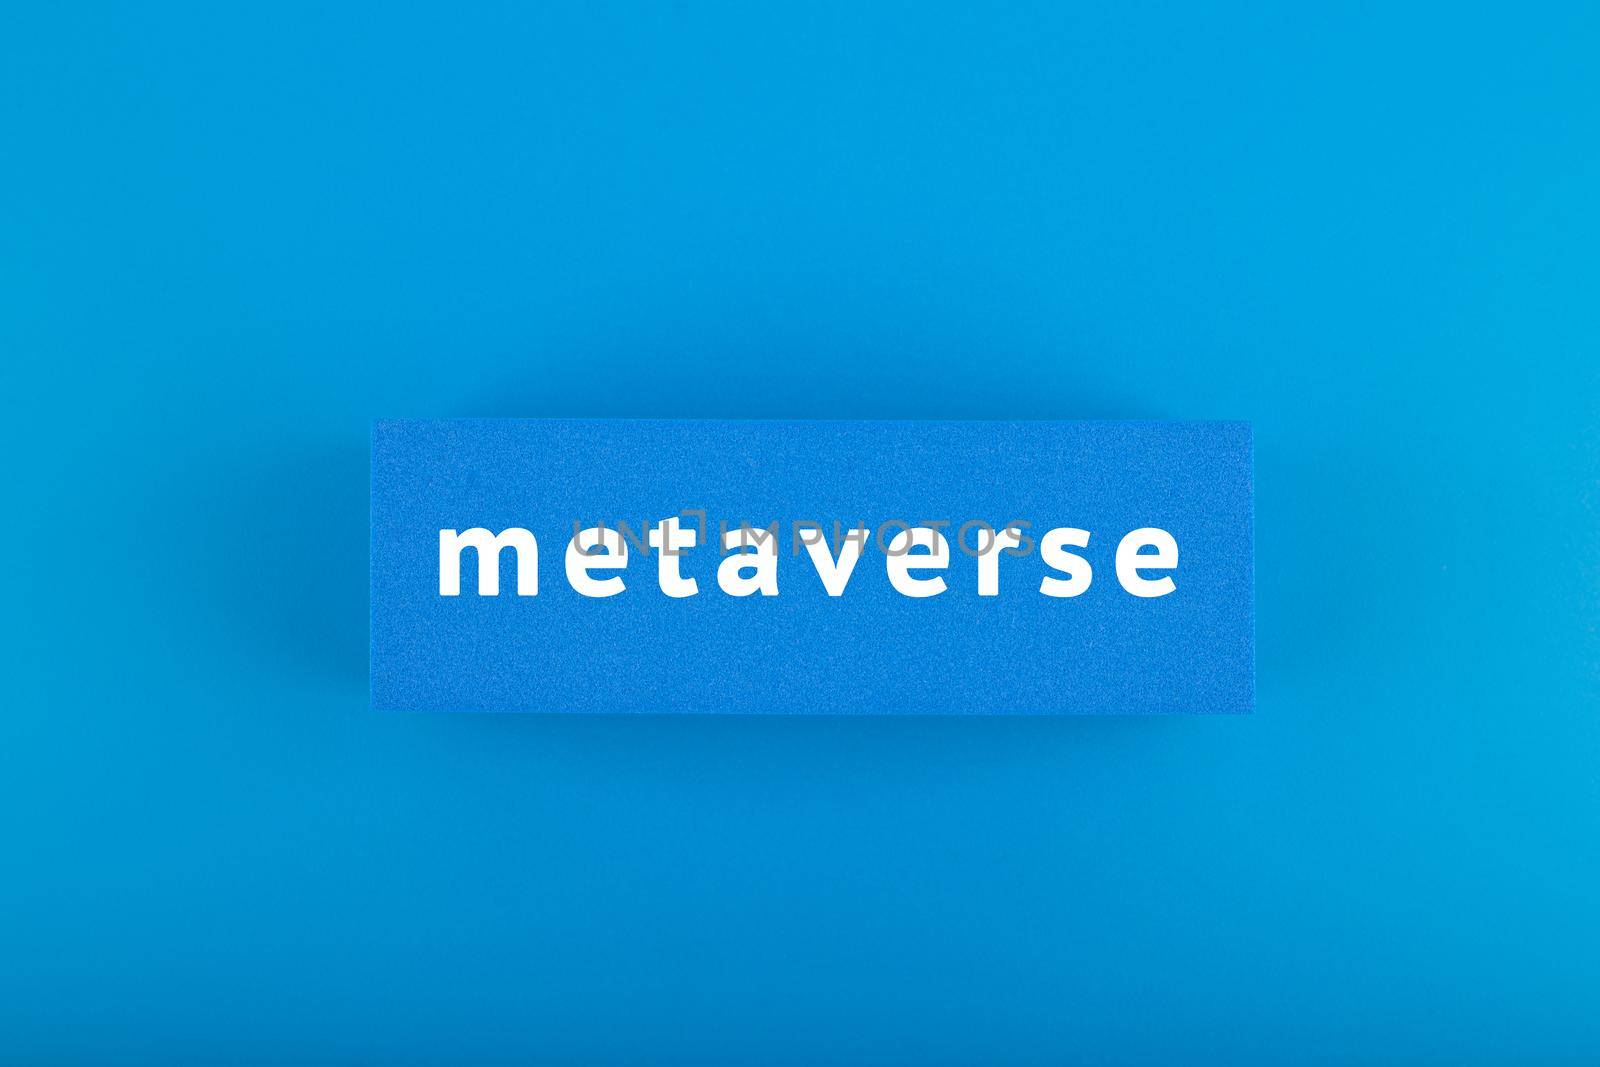 Metaverse modern minimal concept in blue colors. Written metaverse single word on blue rectangle against blue background. Future technologies. 